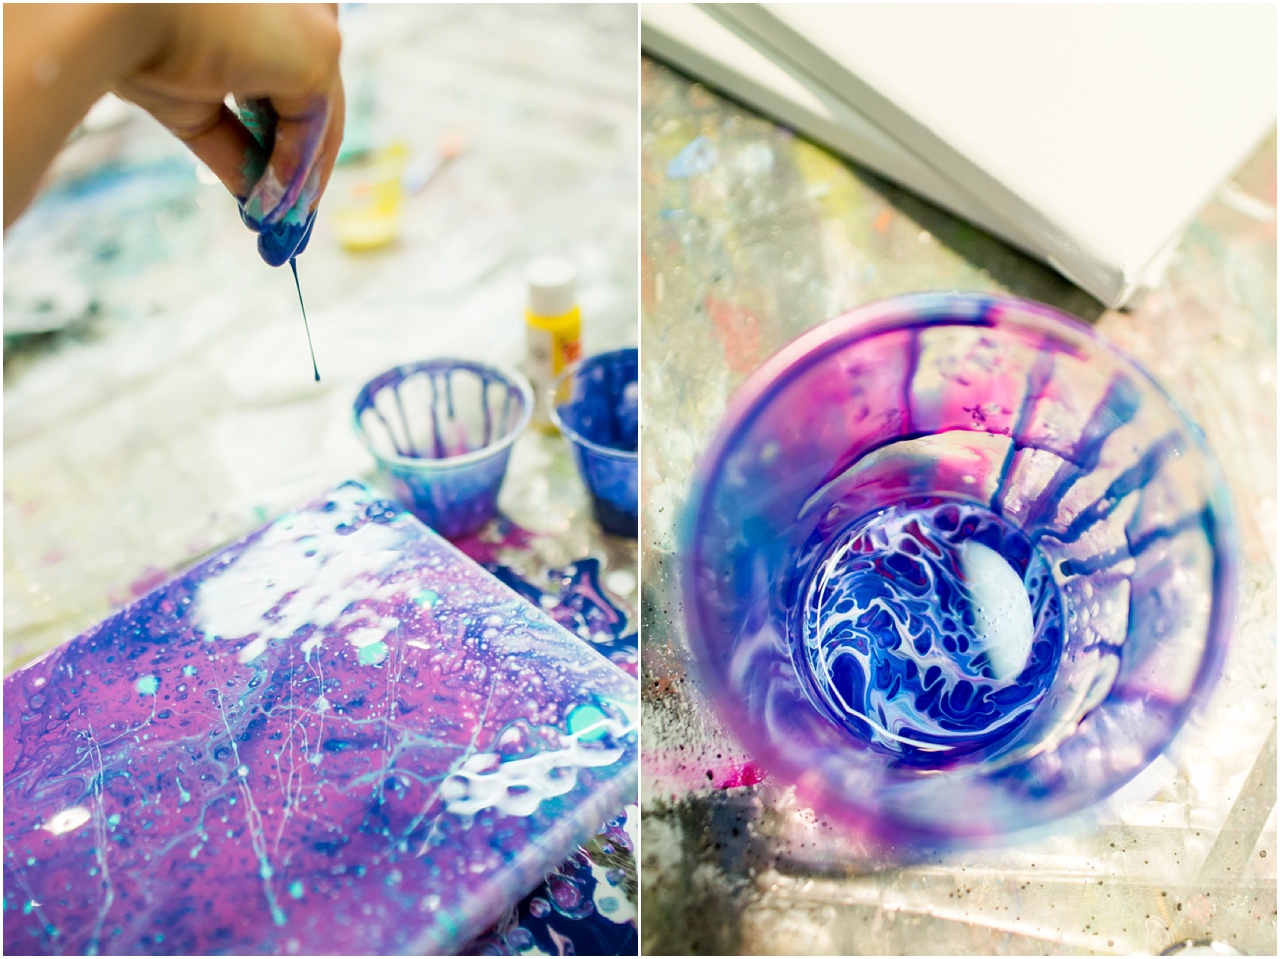 Top 10 Acrylic Paint Pouring Posts May 2019  Pouring painting, Acrylic  pouring art, Acrylic pouring